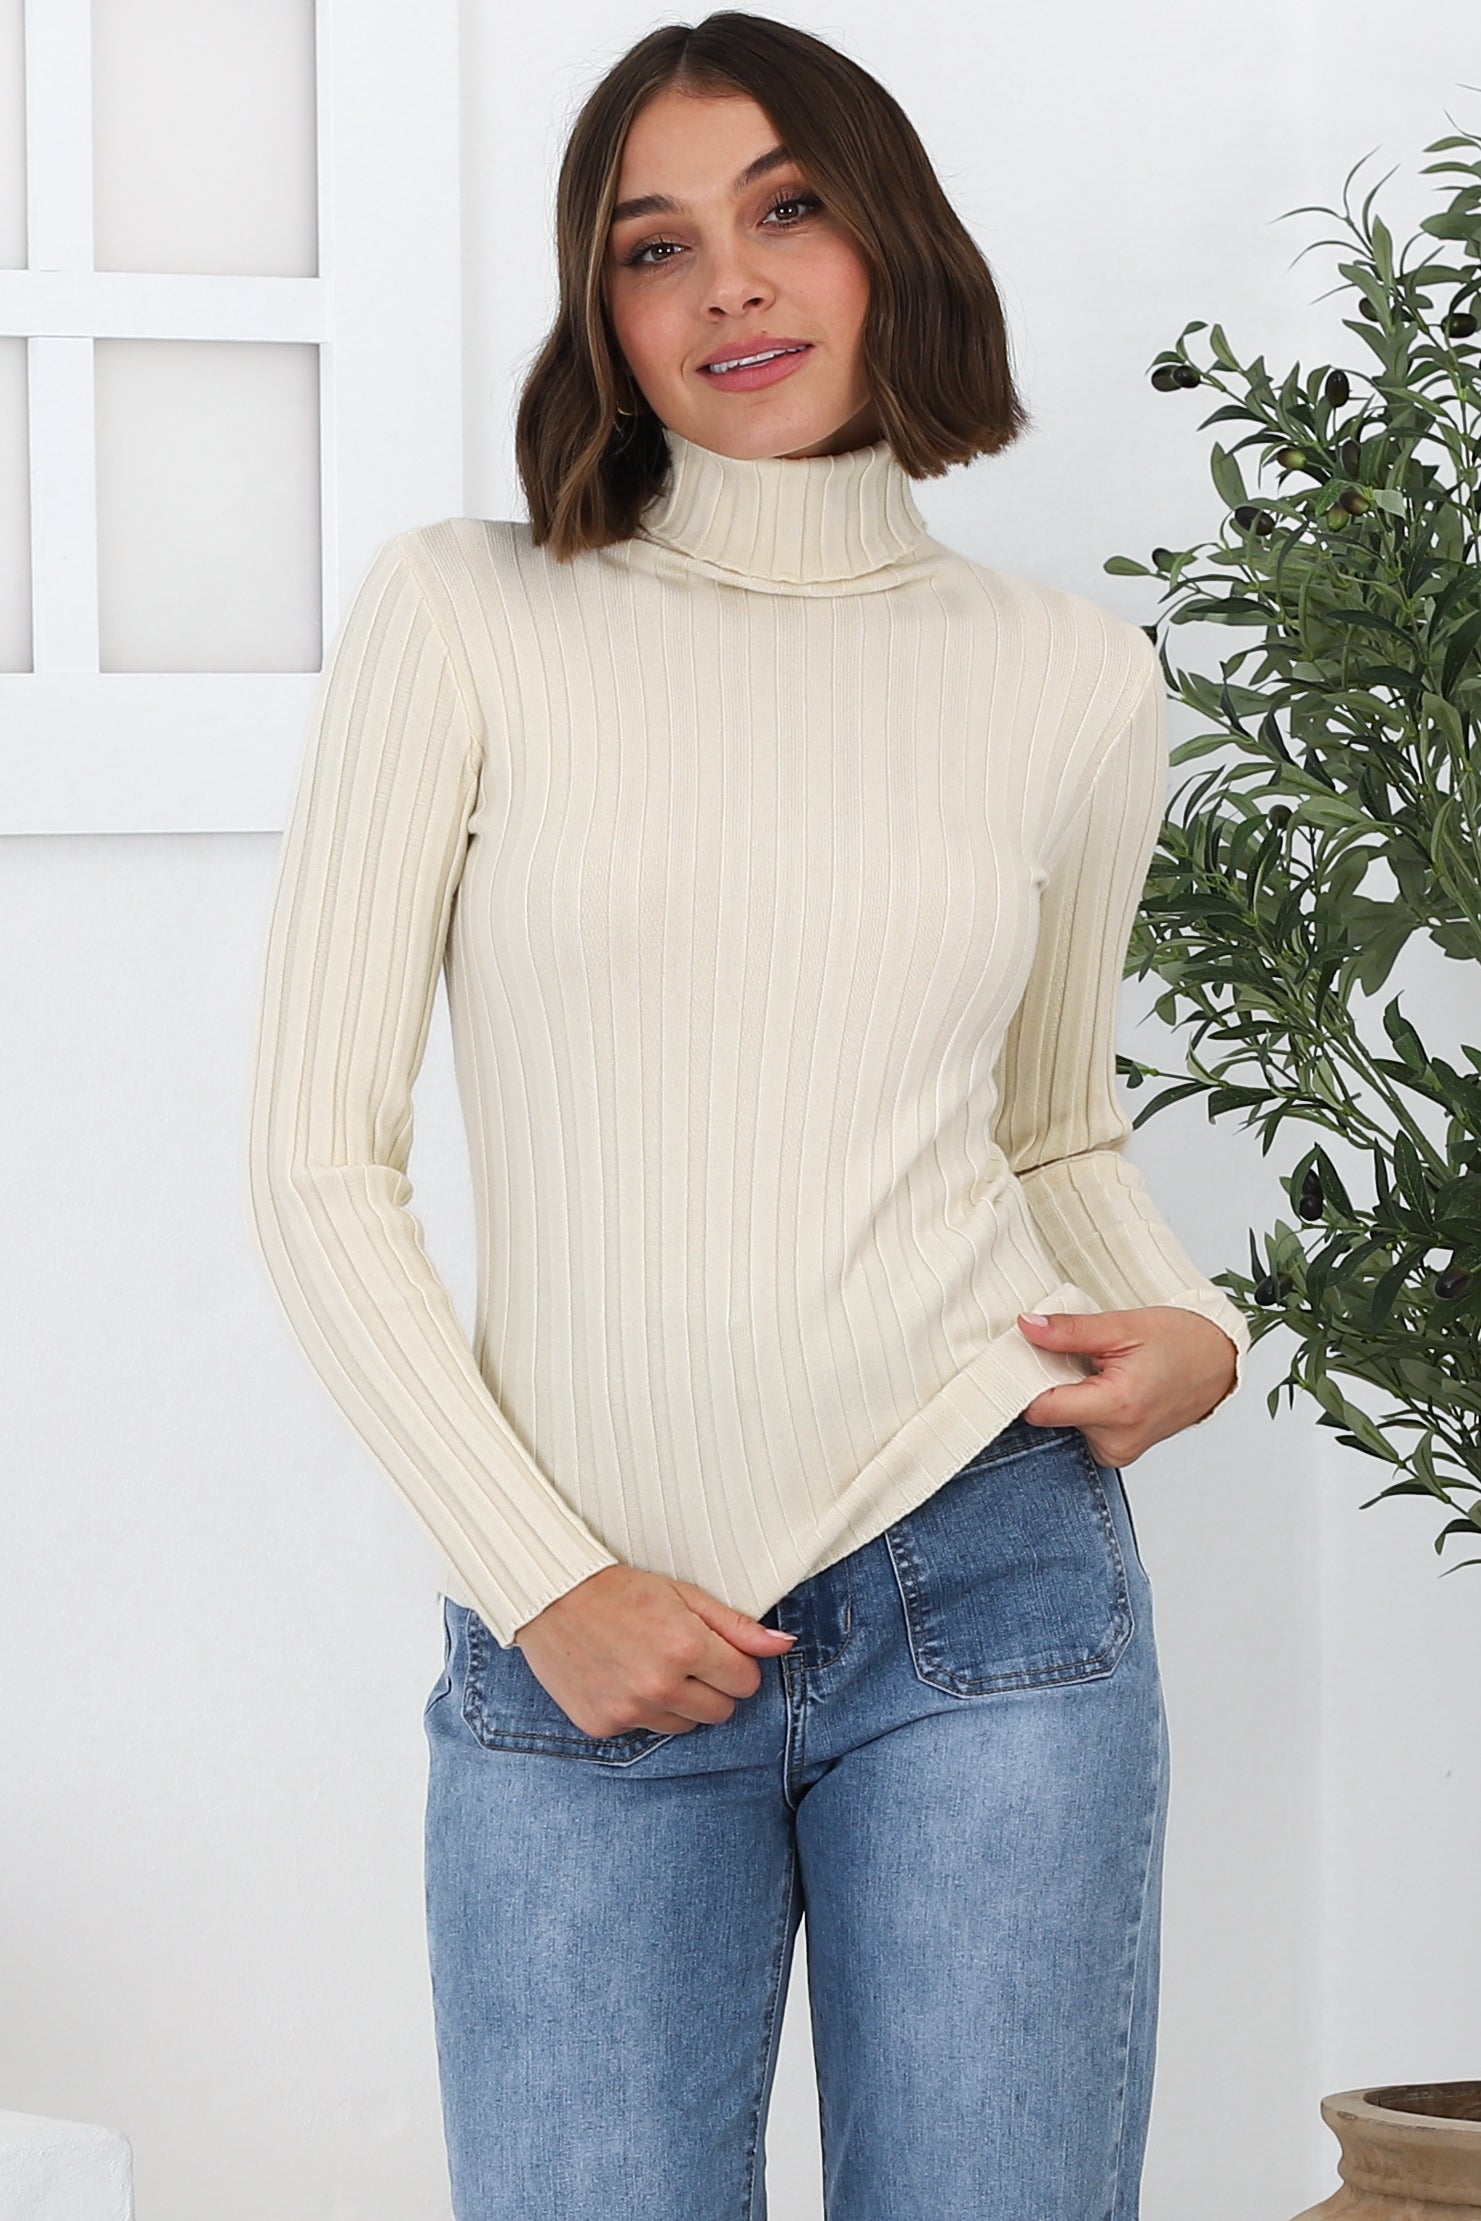 Carson Knit Top - Turtle Neck Knit Top with Scallop Hemlines in Beige